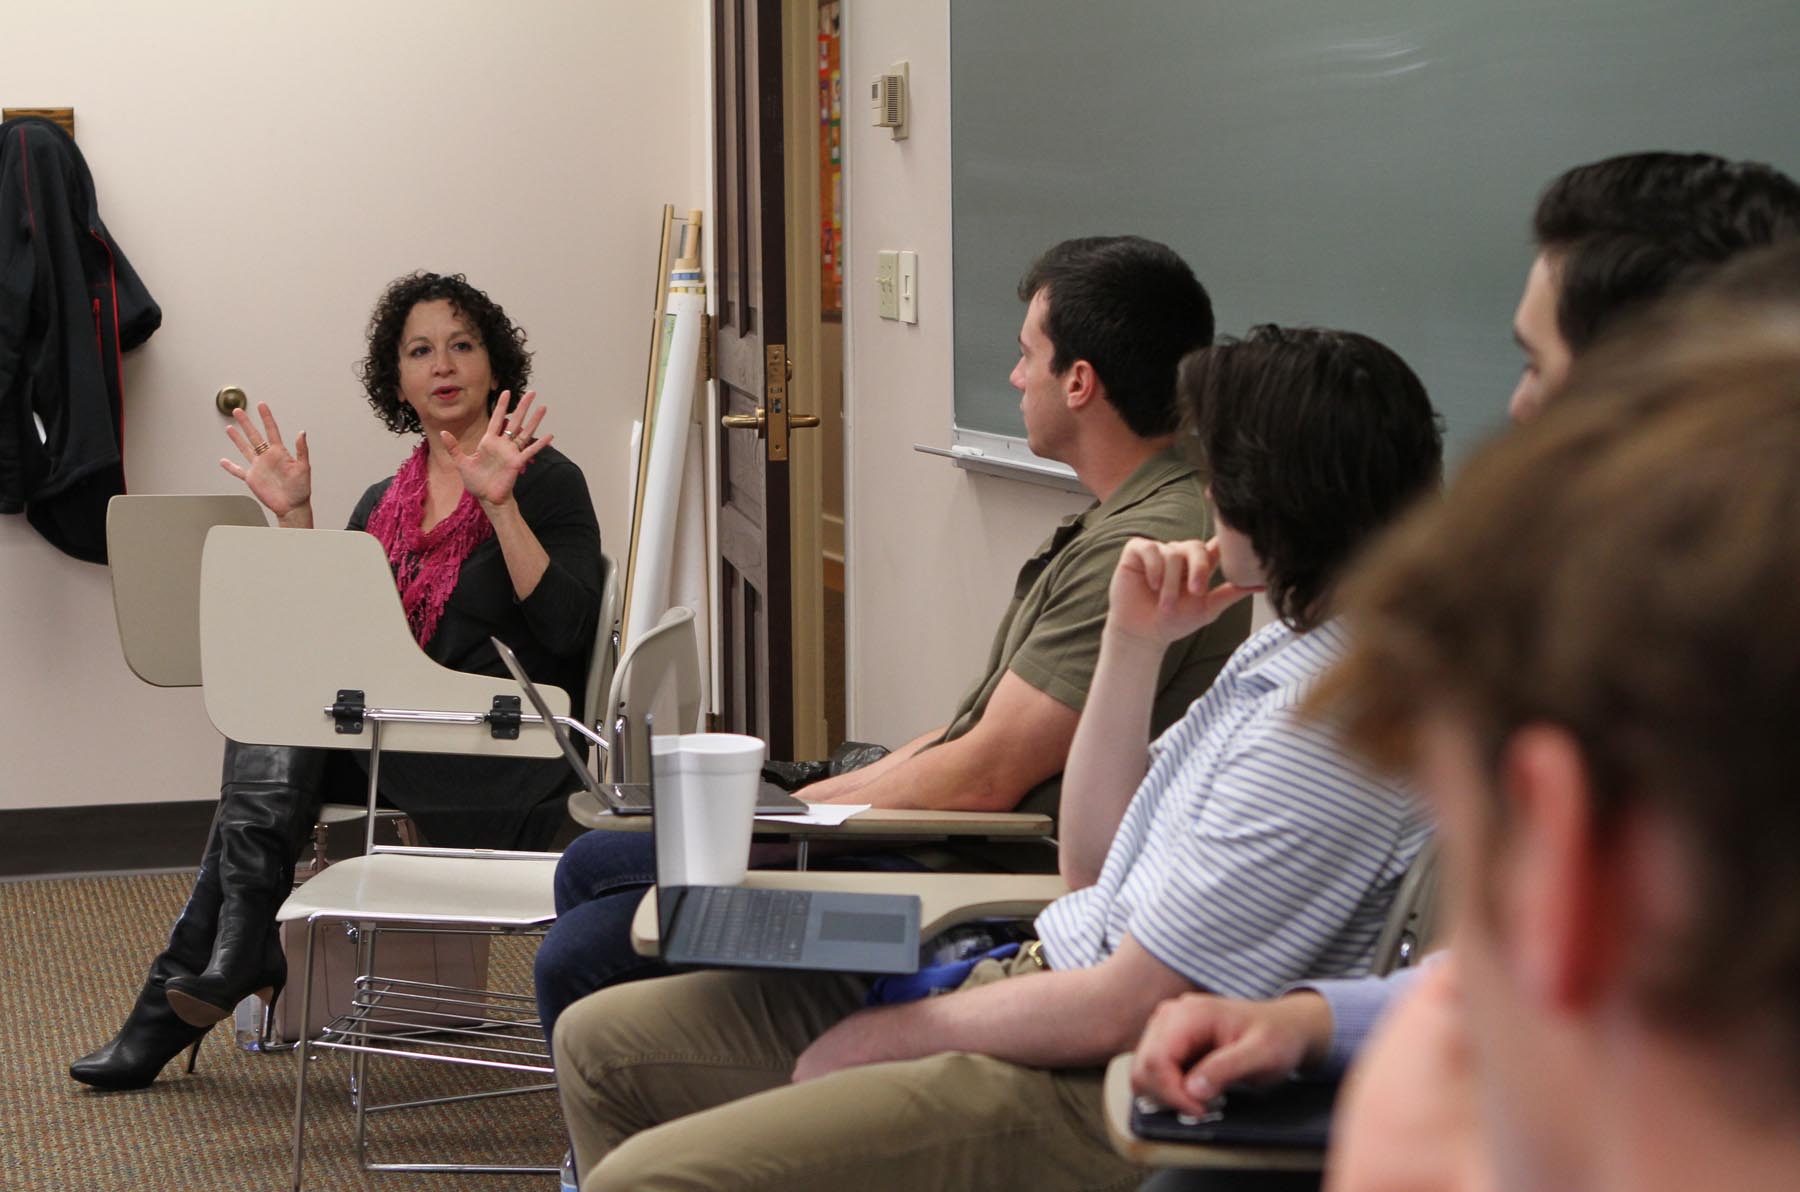 Dr. Lisa A. Flores talked about her research background, what motivates her work, and gave students tips on how to grow as rhetorical scholars. 